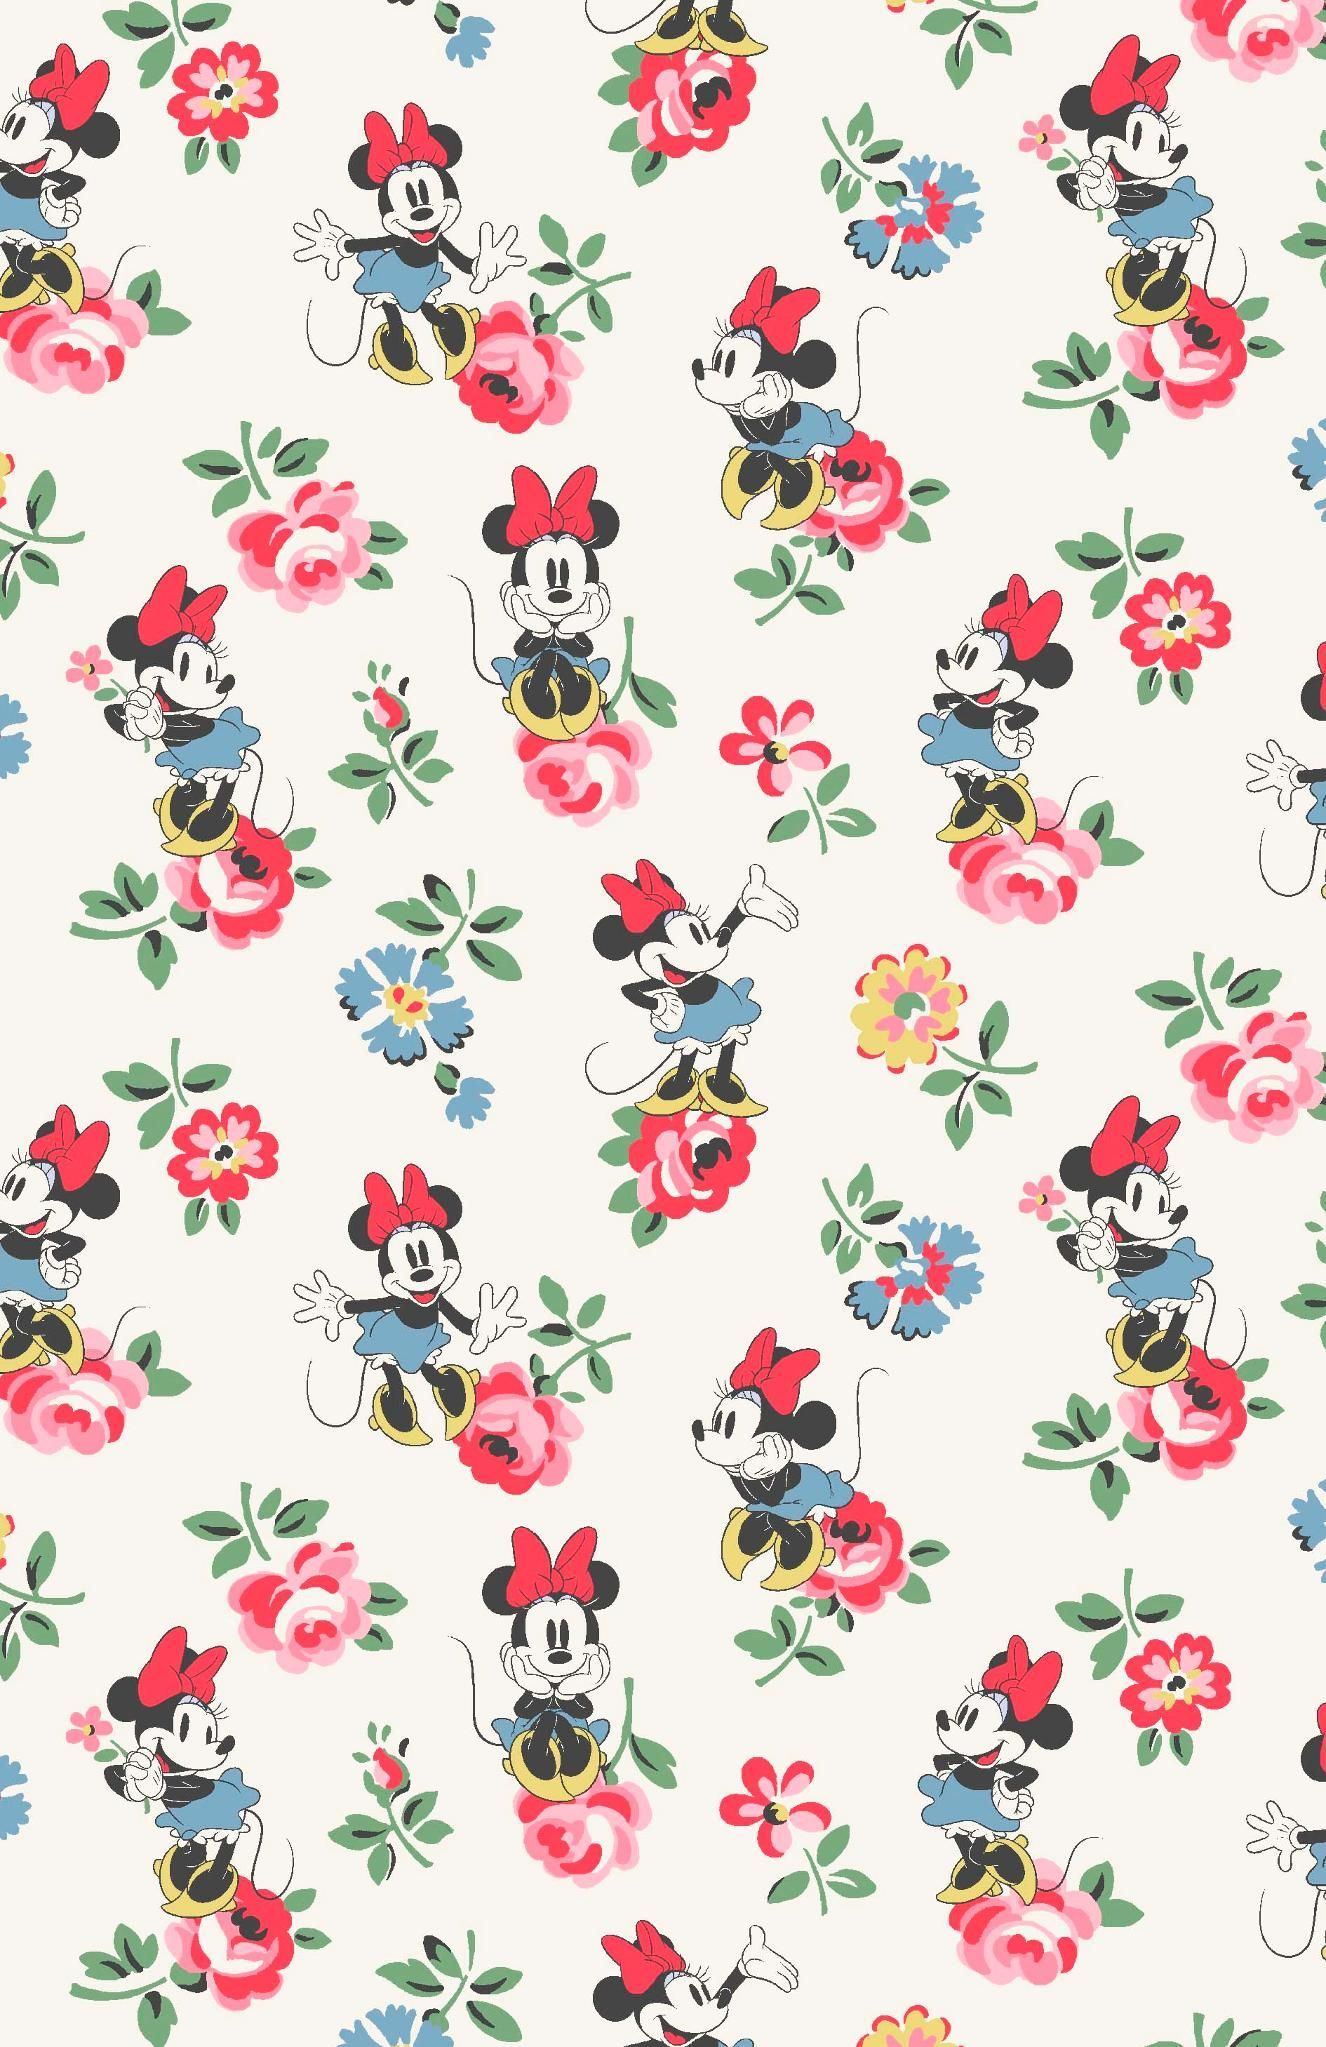 Vintage Minnie Mouse iPhone Wallpaper Free Vintage Minnie Mouse iPhone Background